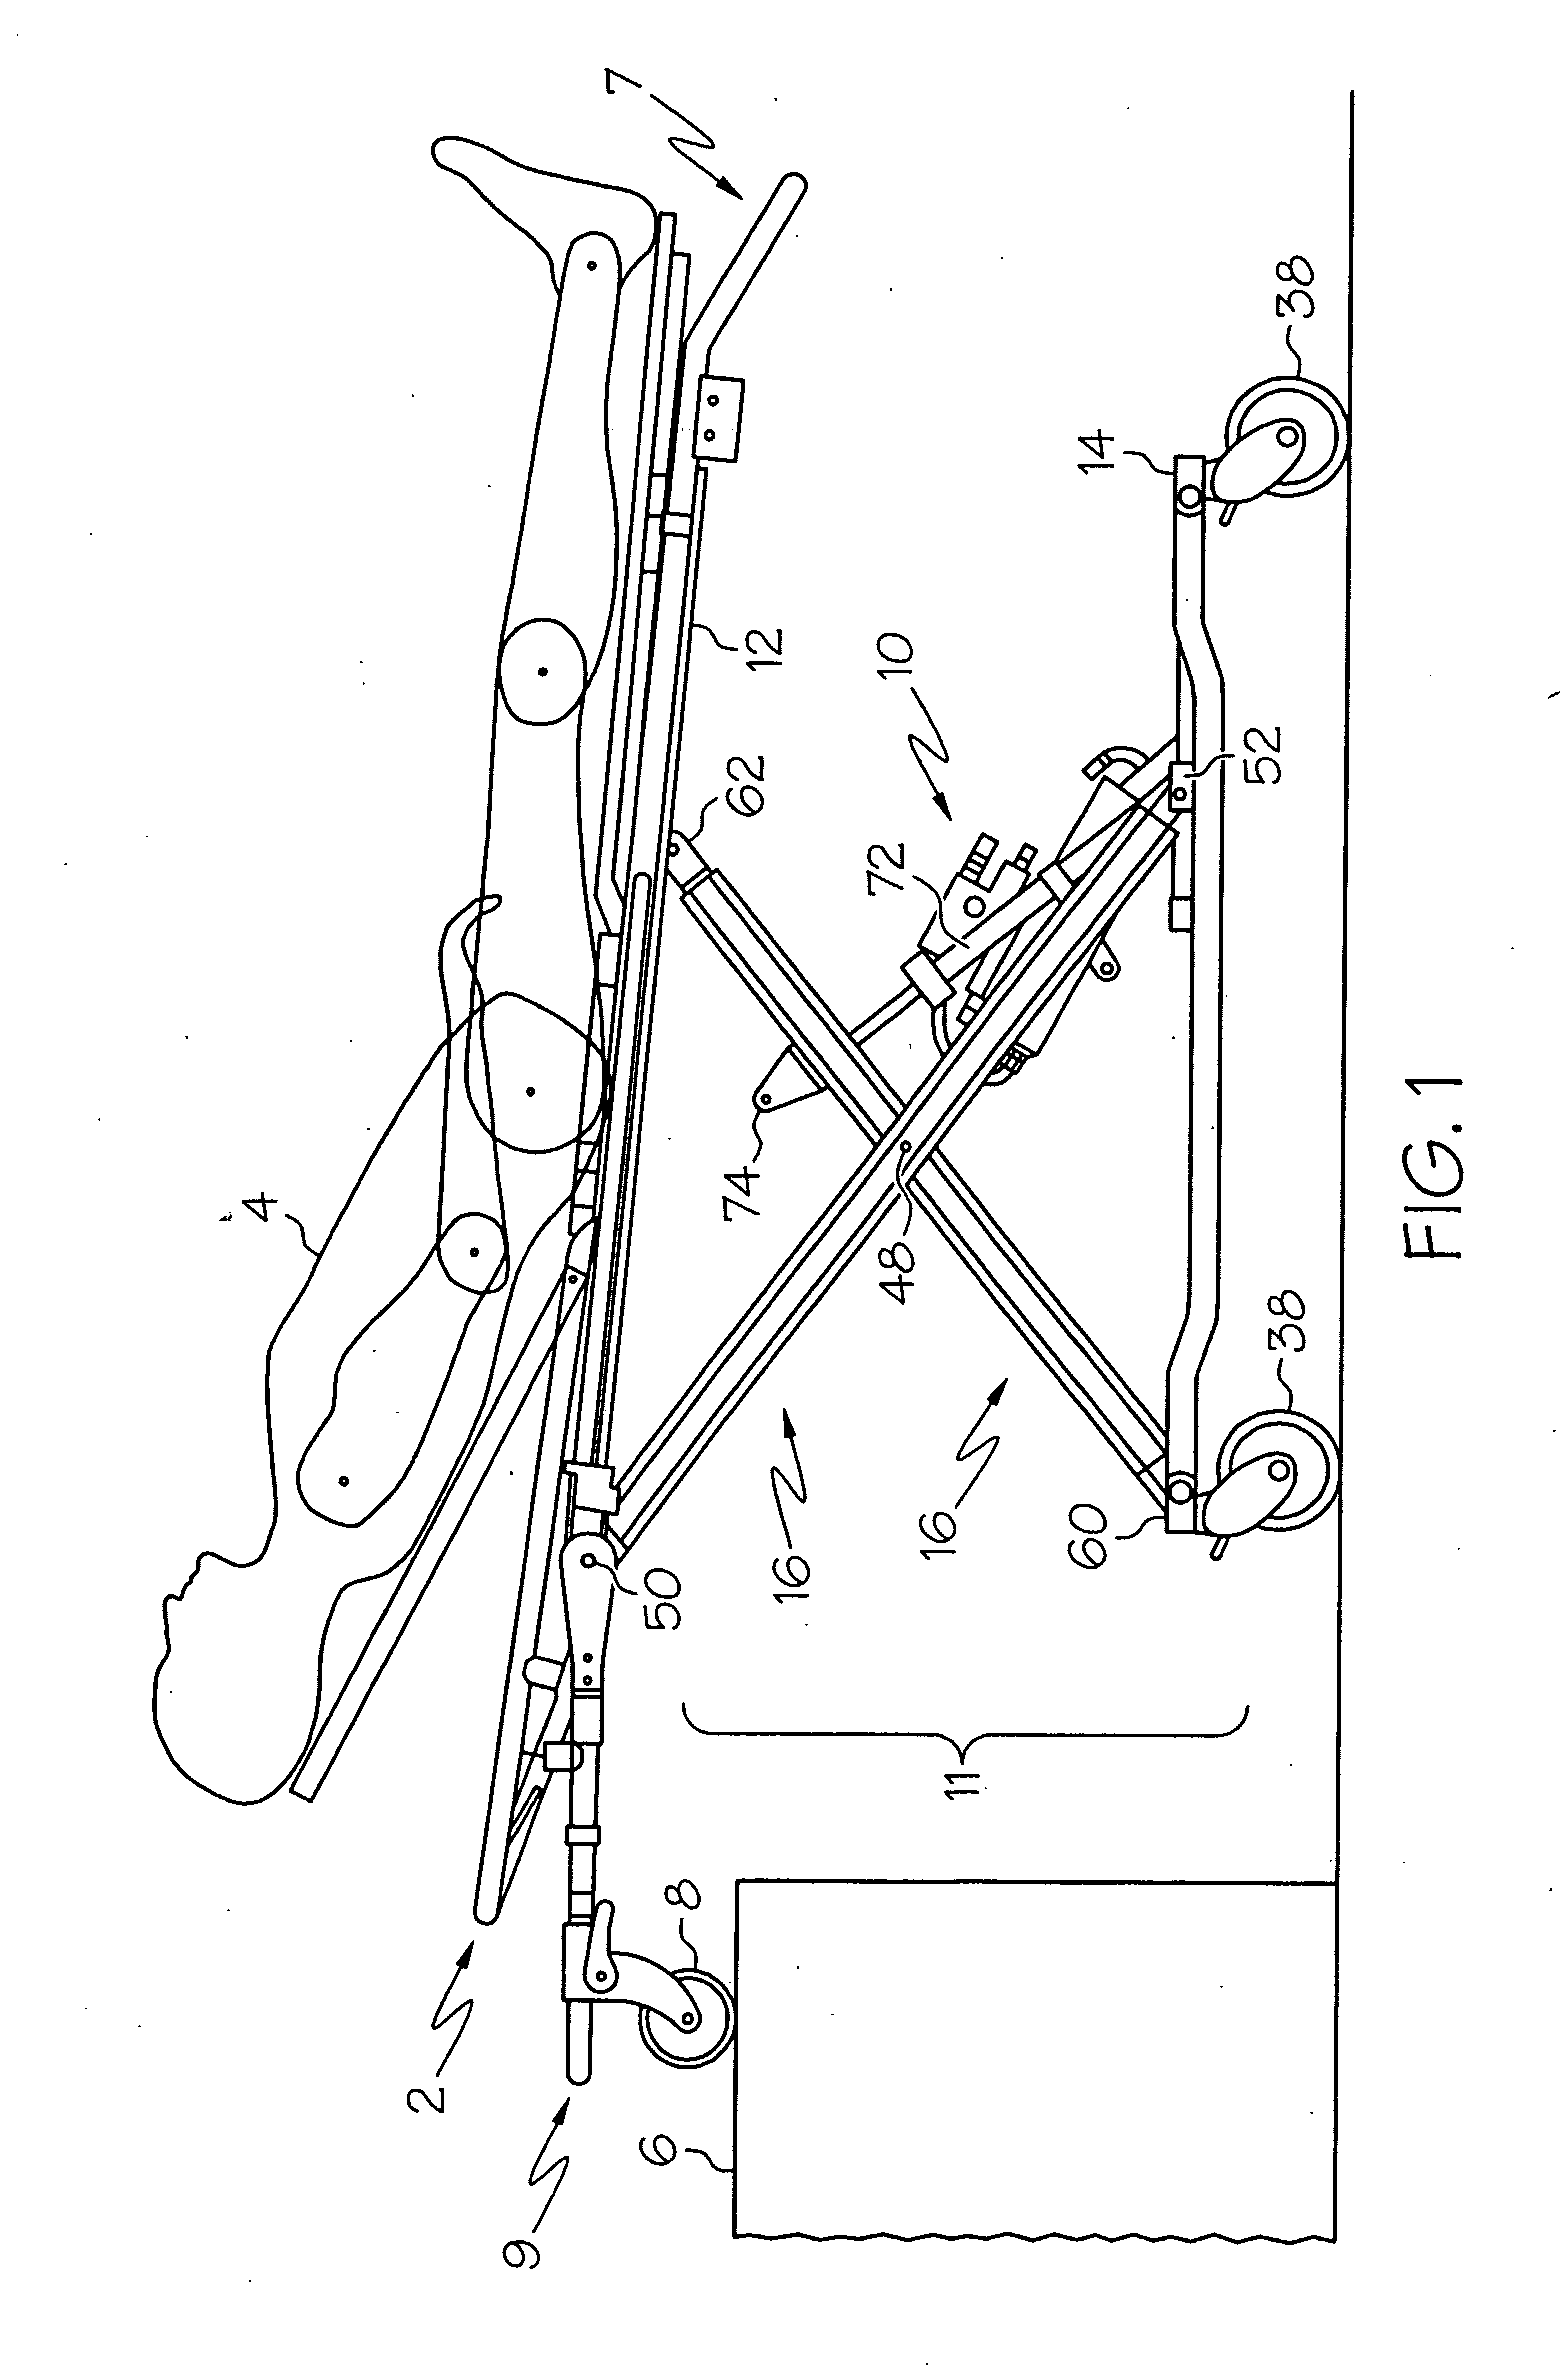 Charging system for recharging a battery of an electrohydraulically powered lift ambulance cot with an electrical system of an emergency vehicle